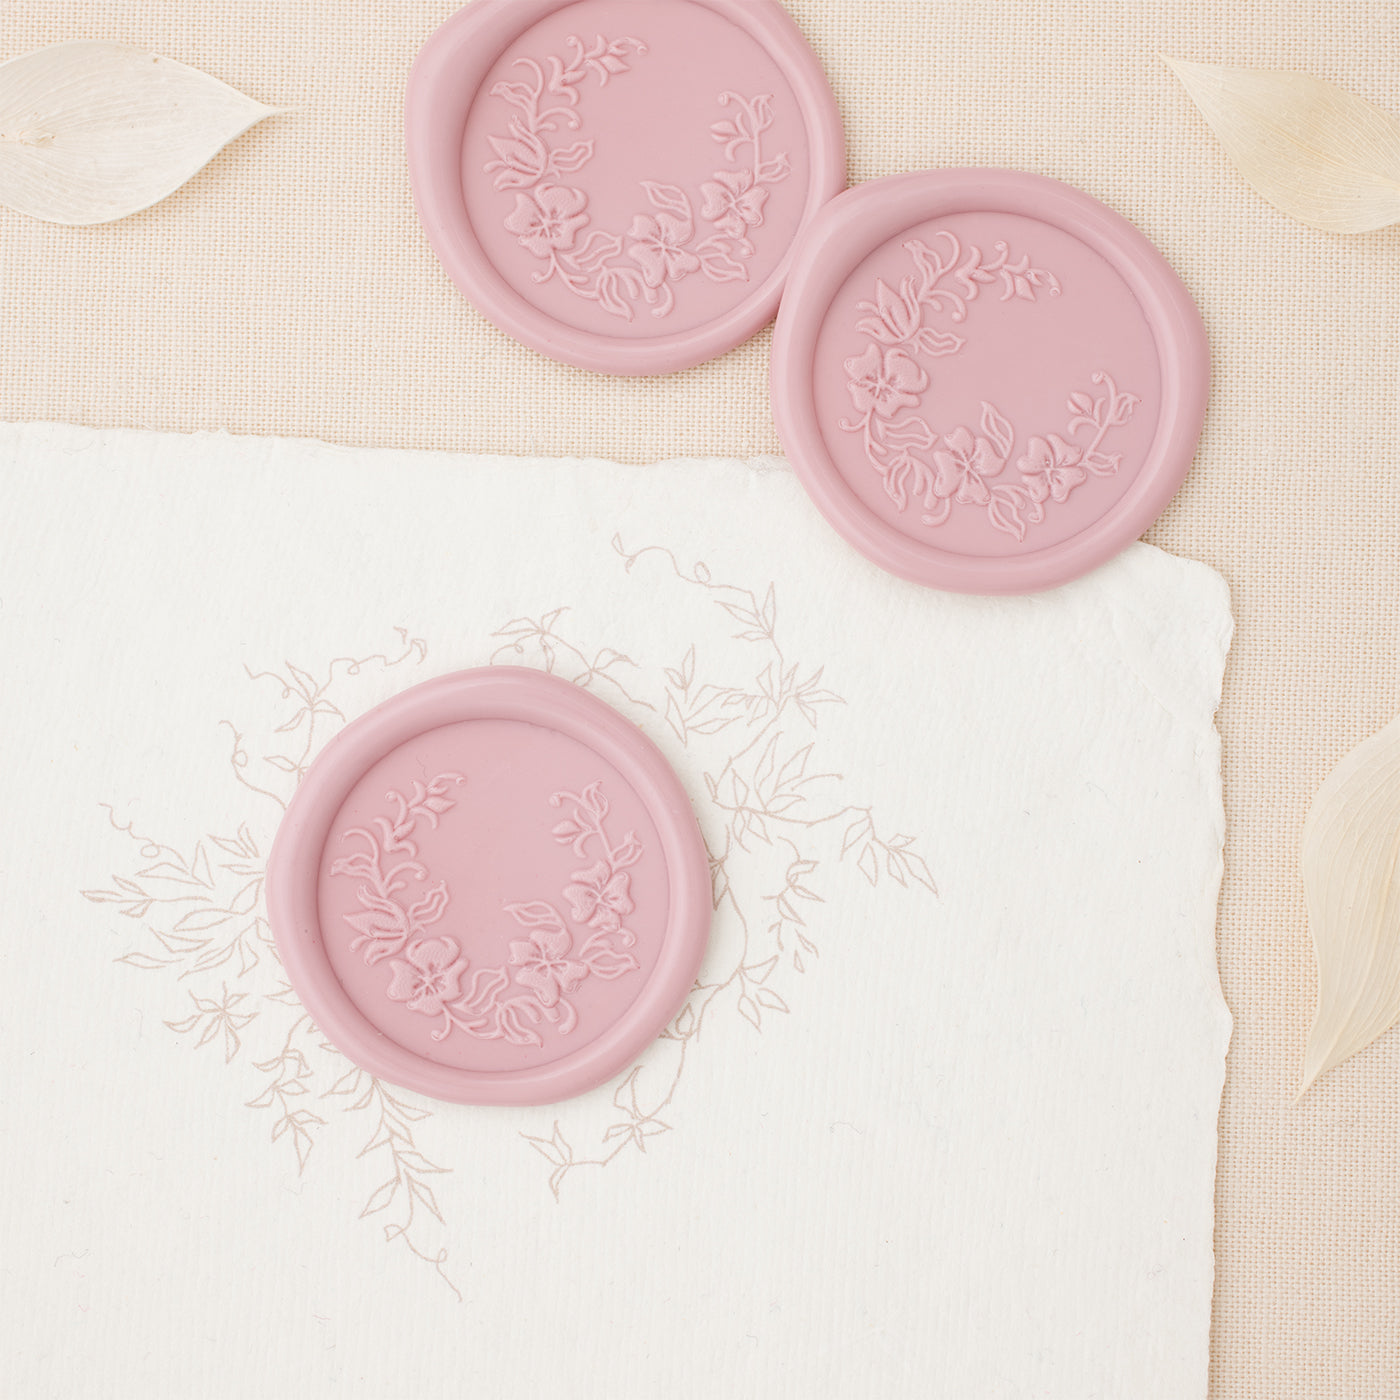 Wax Seal Beads – Paper Pastries